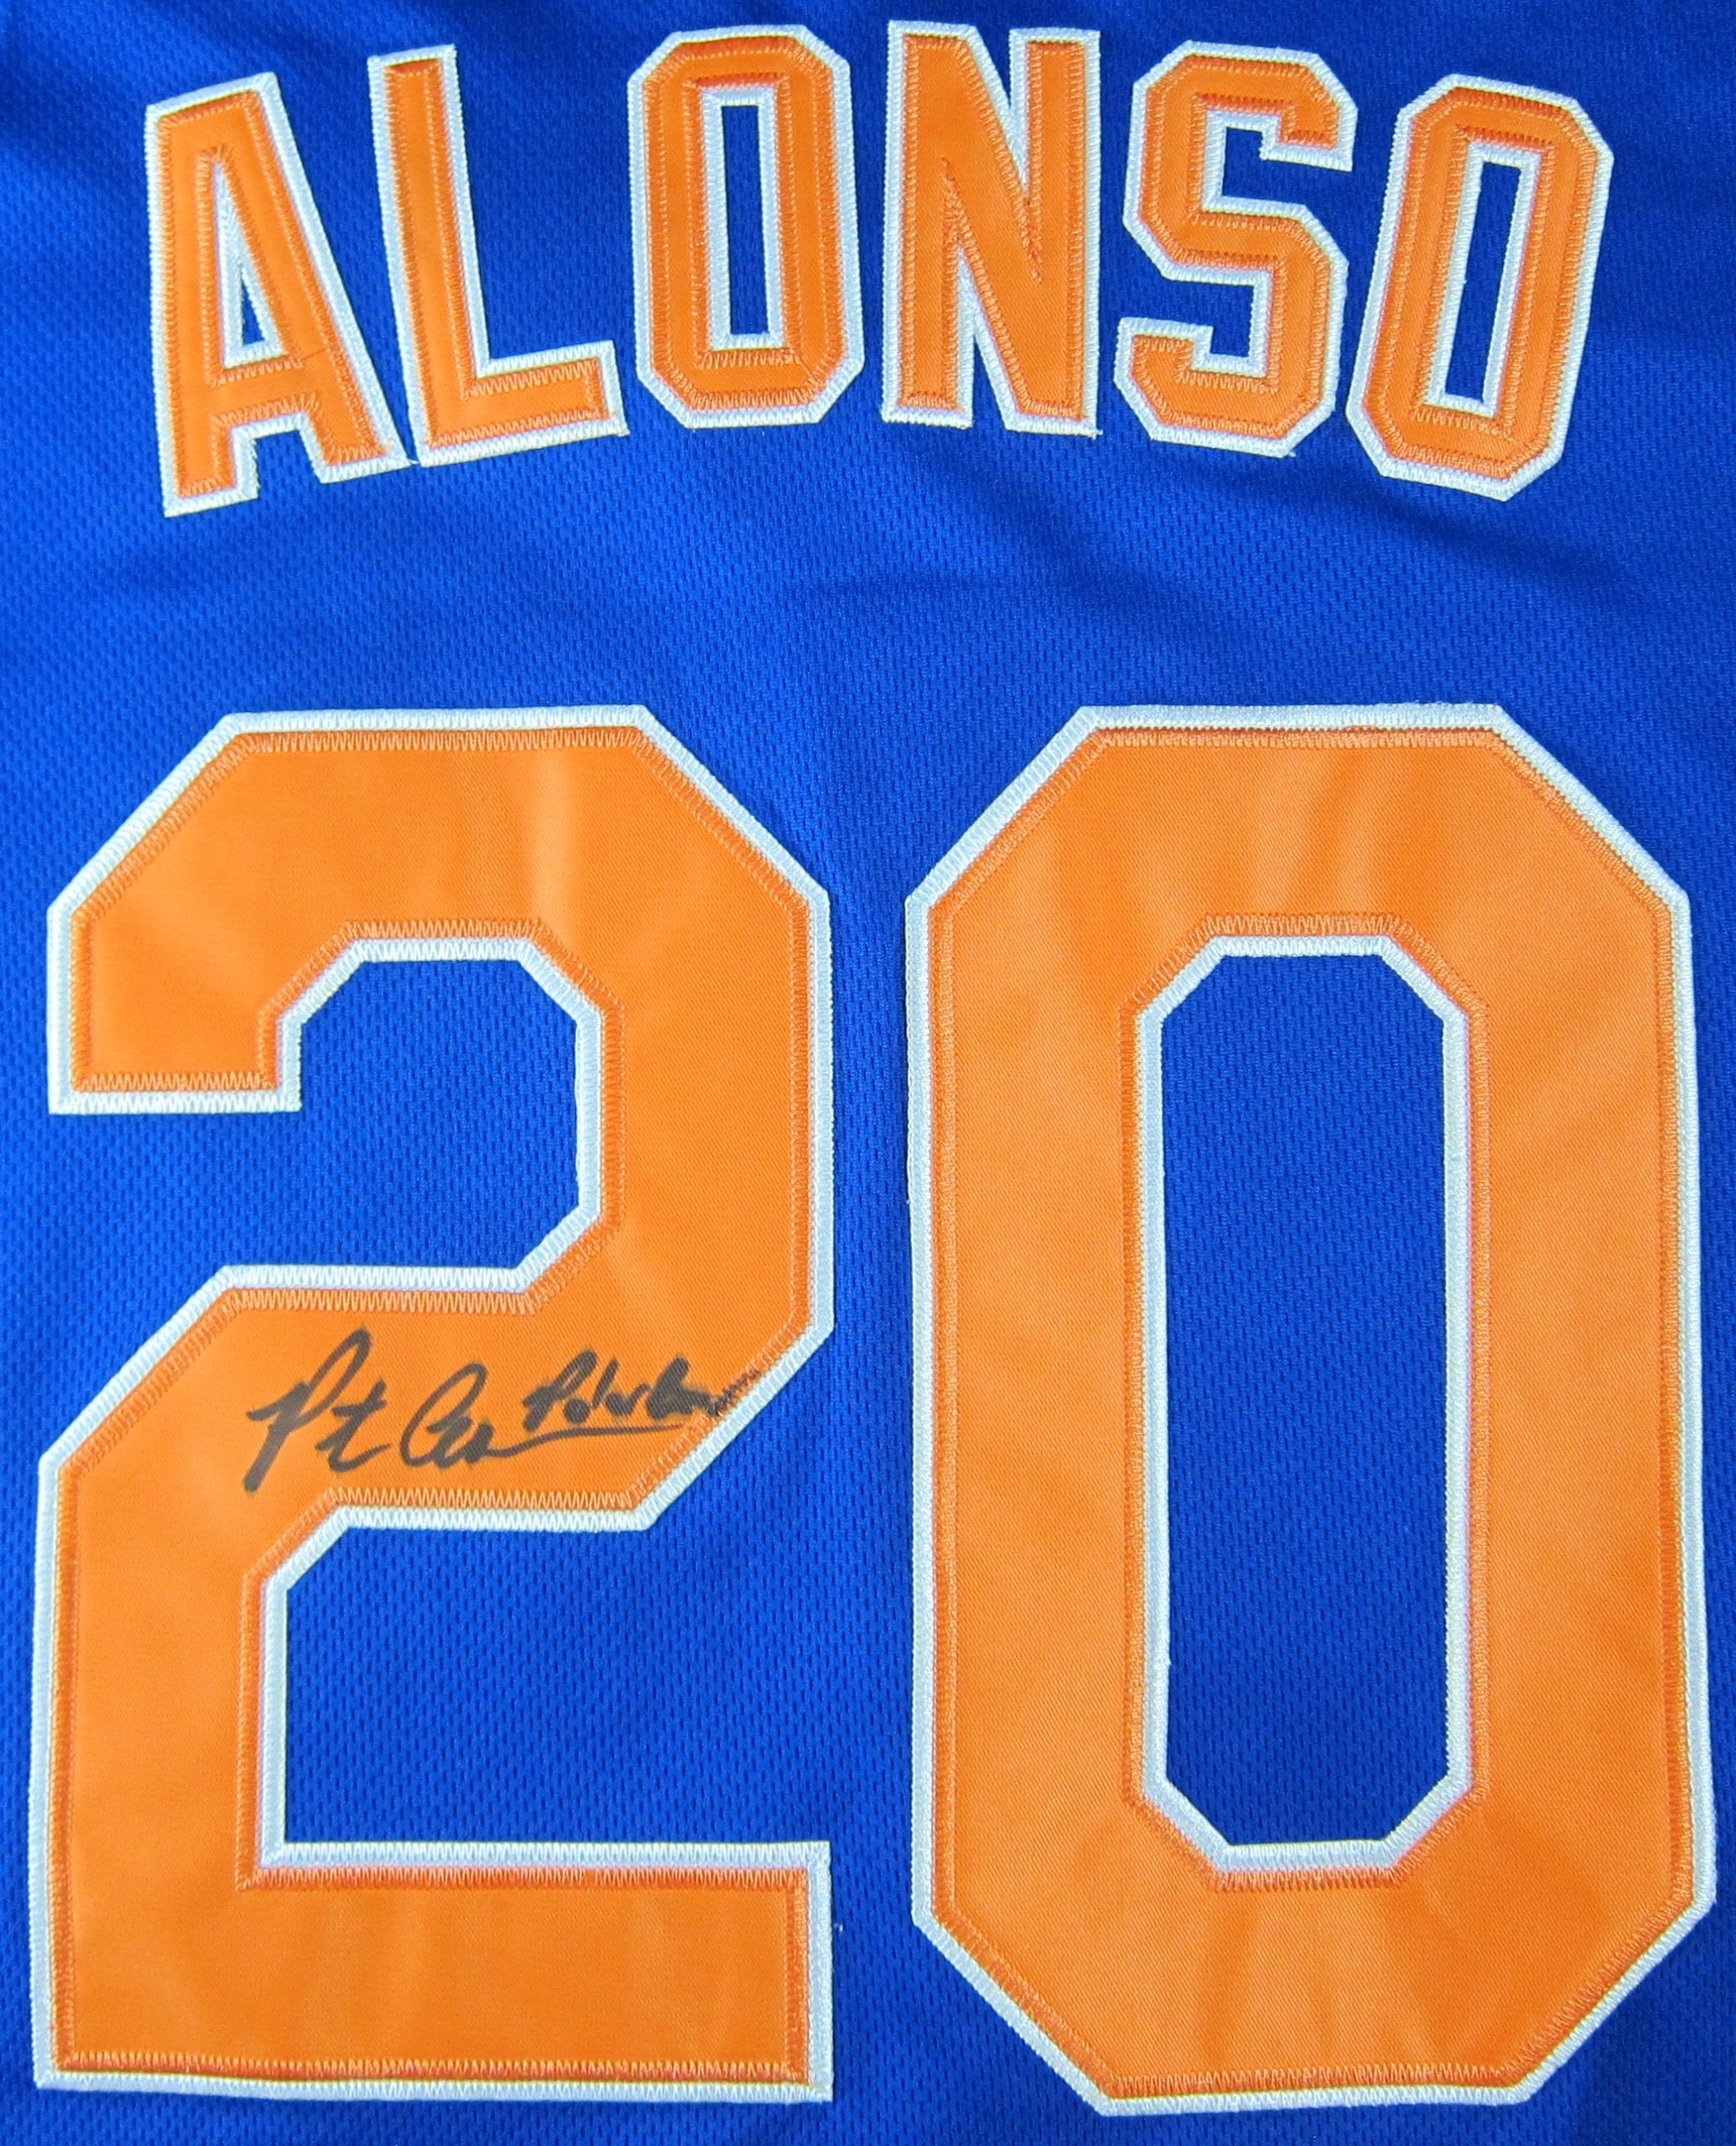 pete alonso all star game jersey